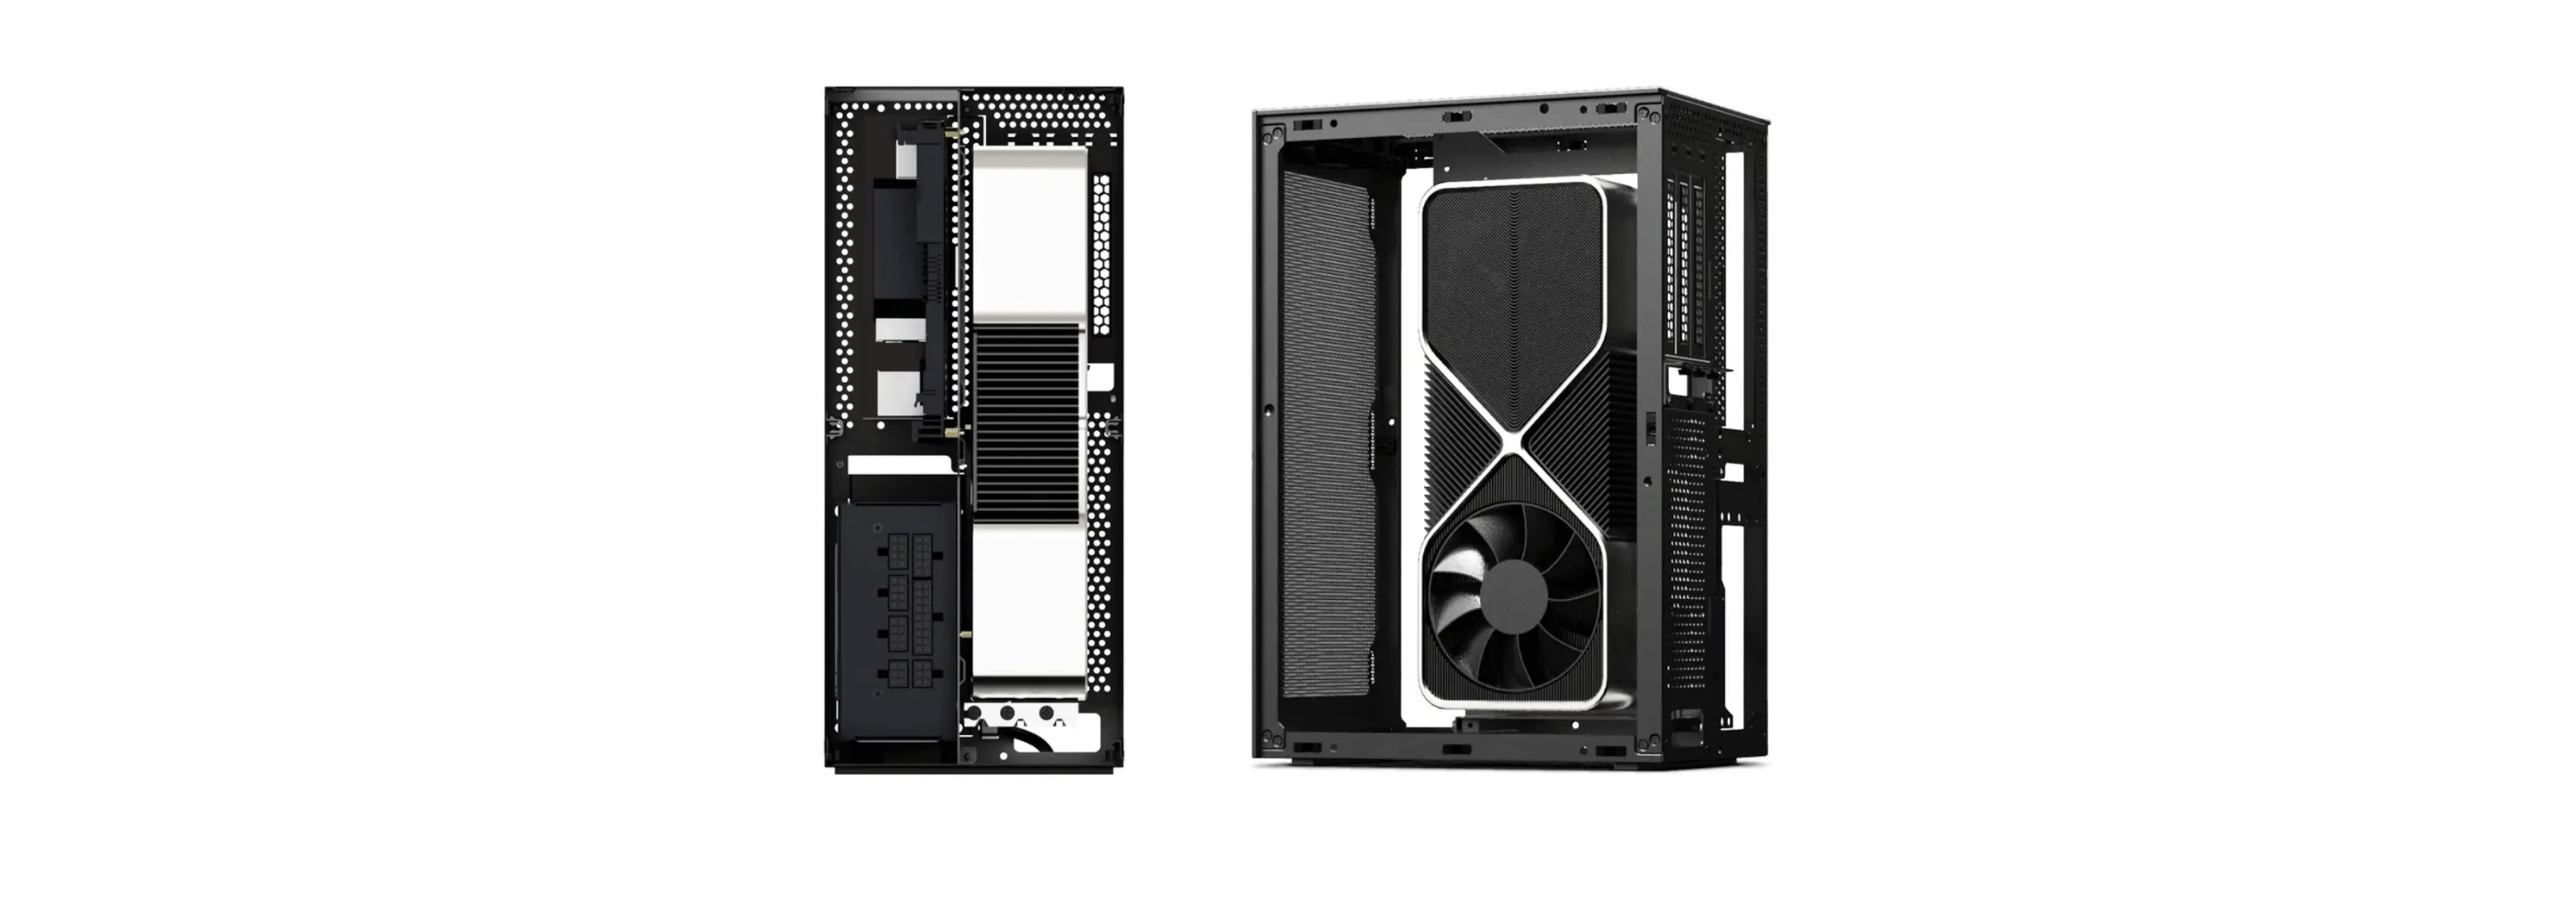 Mesh Side Panel, Meshlicious PC Case Accessory